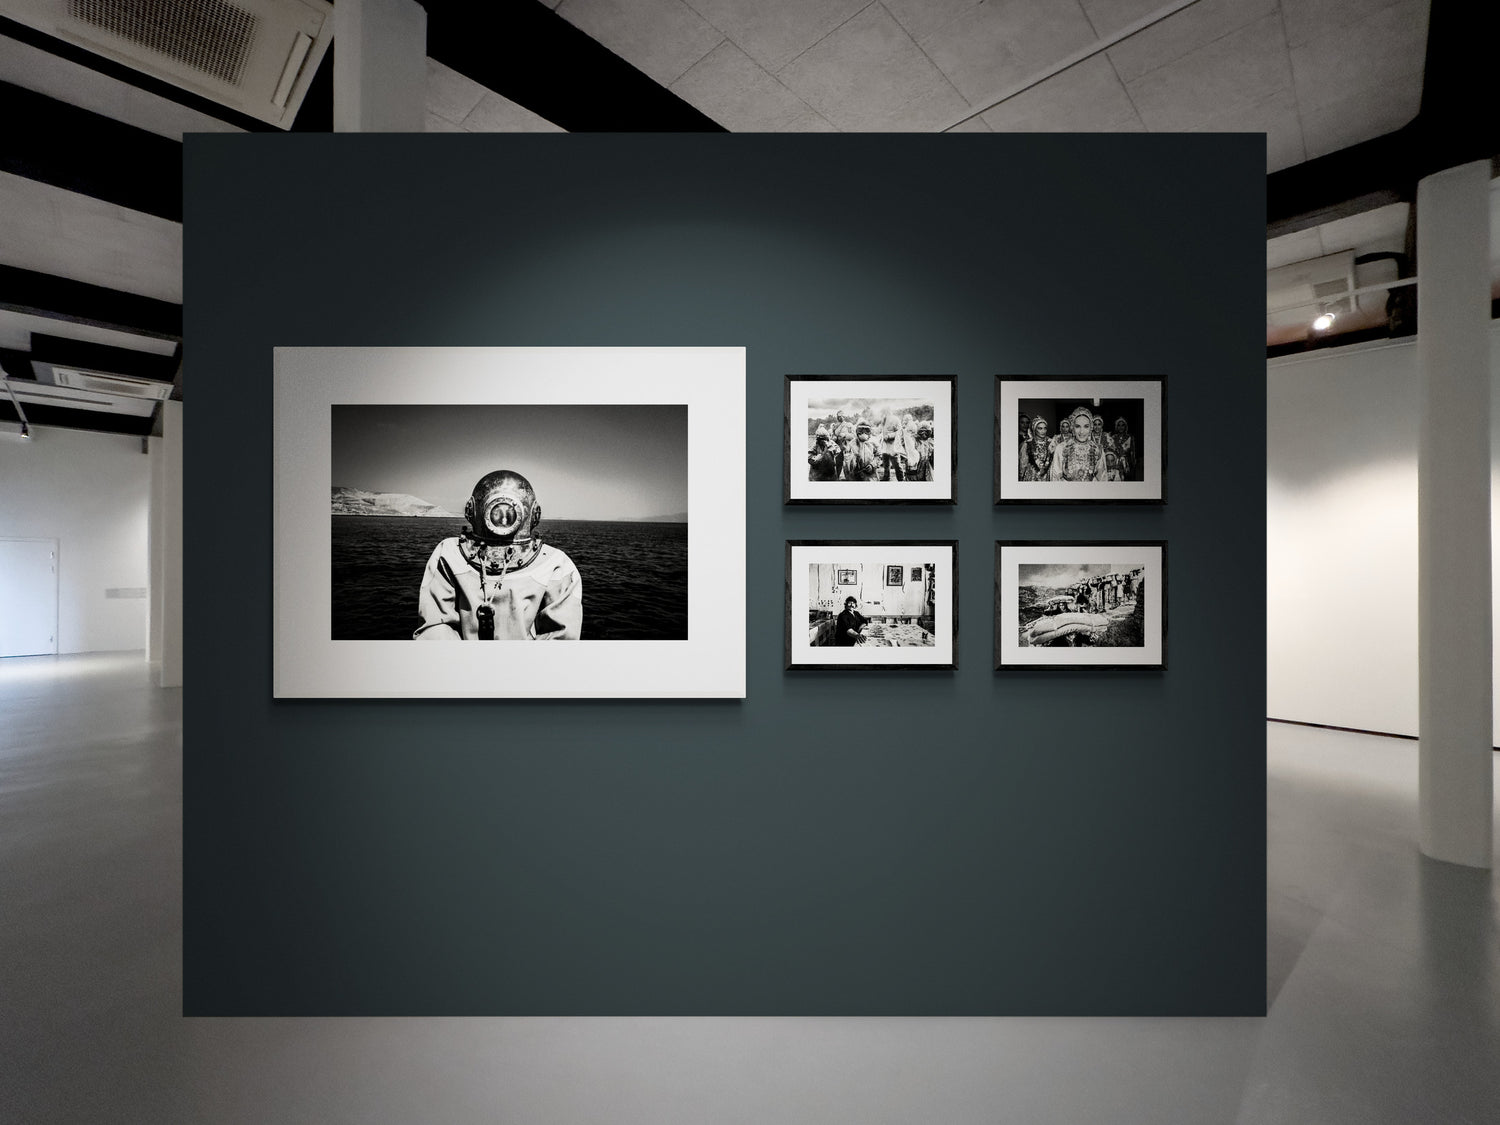 Black and White Photography Wall Art from Greece, by George Tatakis. Selection from the project 'Ethos' inside a museum gallery